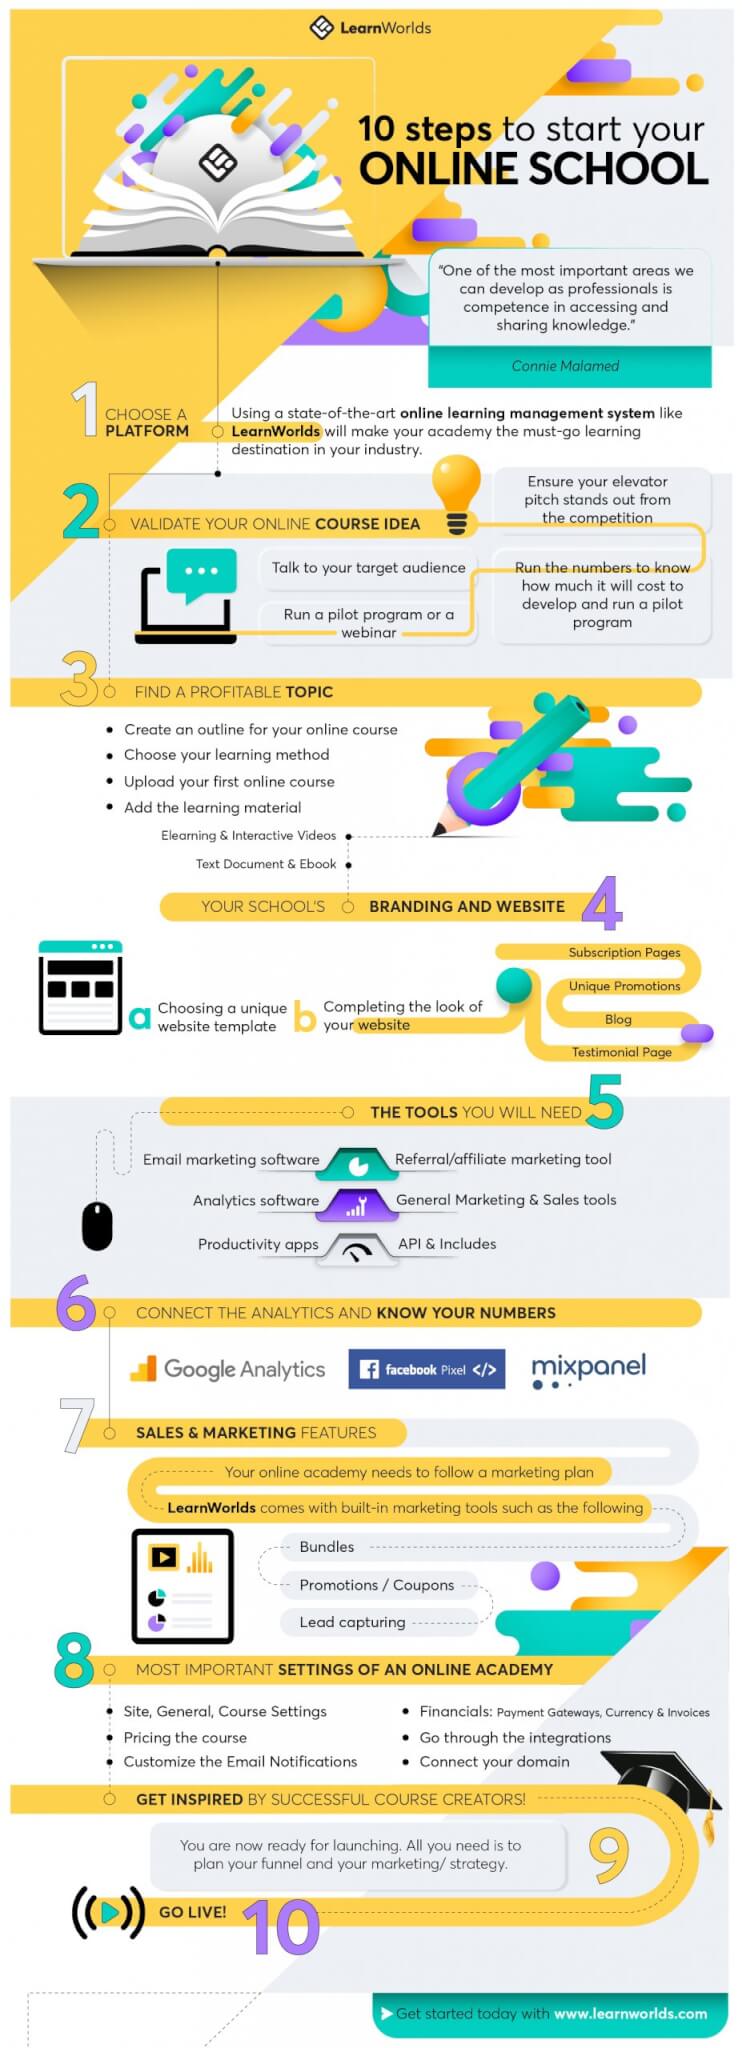 Infographic on 10 Steps to Starting Your Online School or Academy